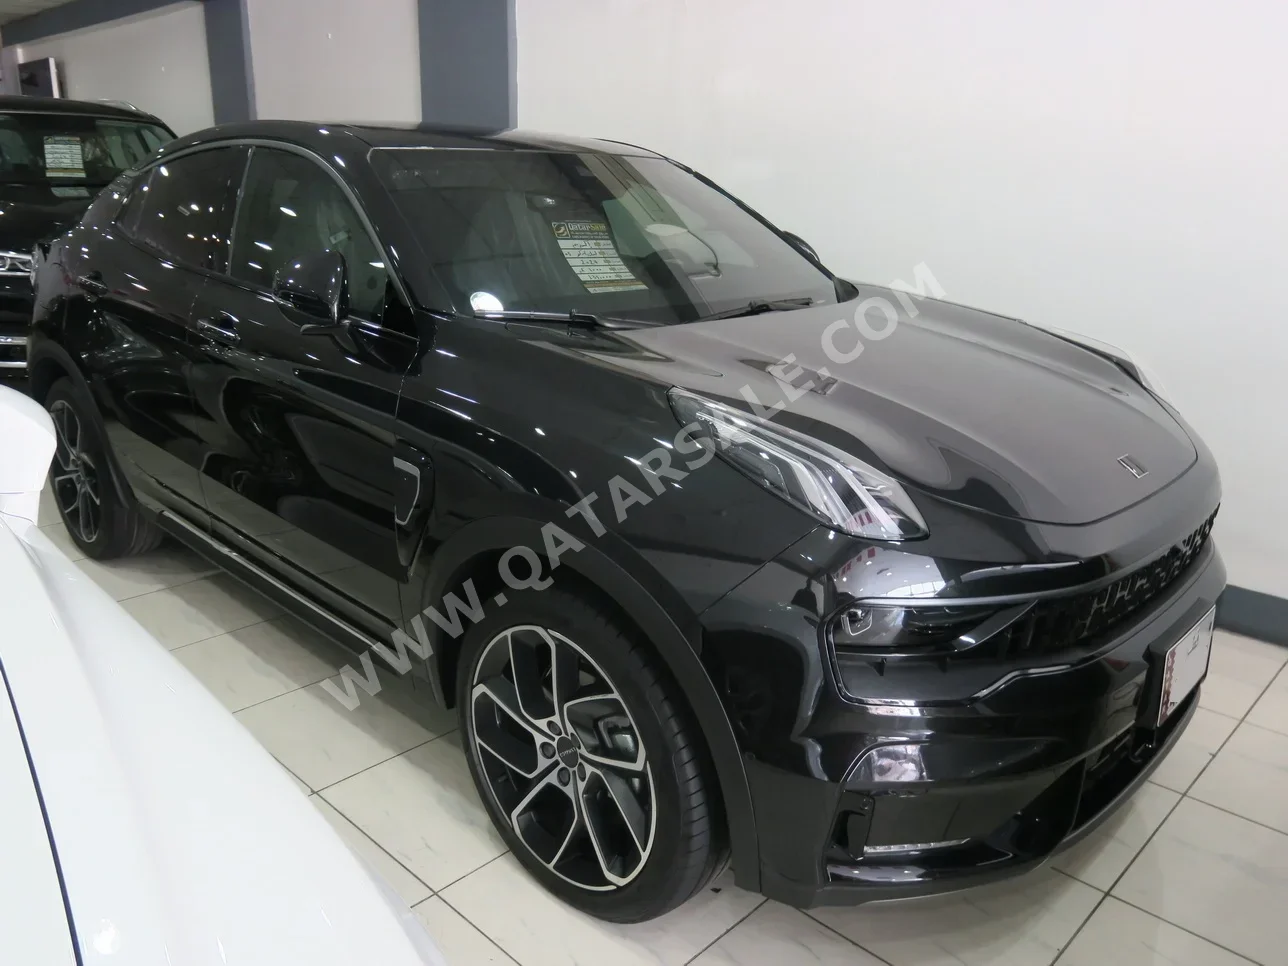 Lynk & Co  05  Hyper Plus  2024  Automatic  1,000 Km  4 Cylinder  Four Wheel Drive (4WD)  SUV  Black  With Warranty